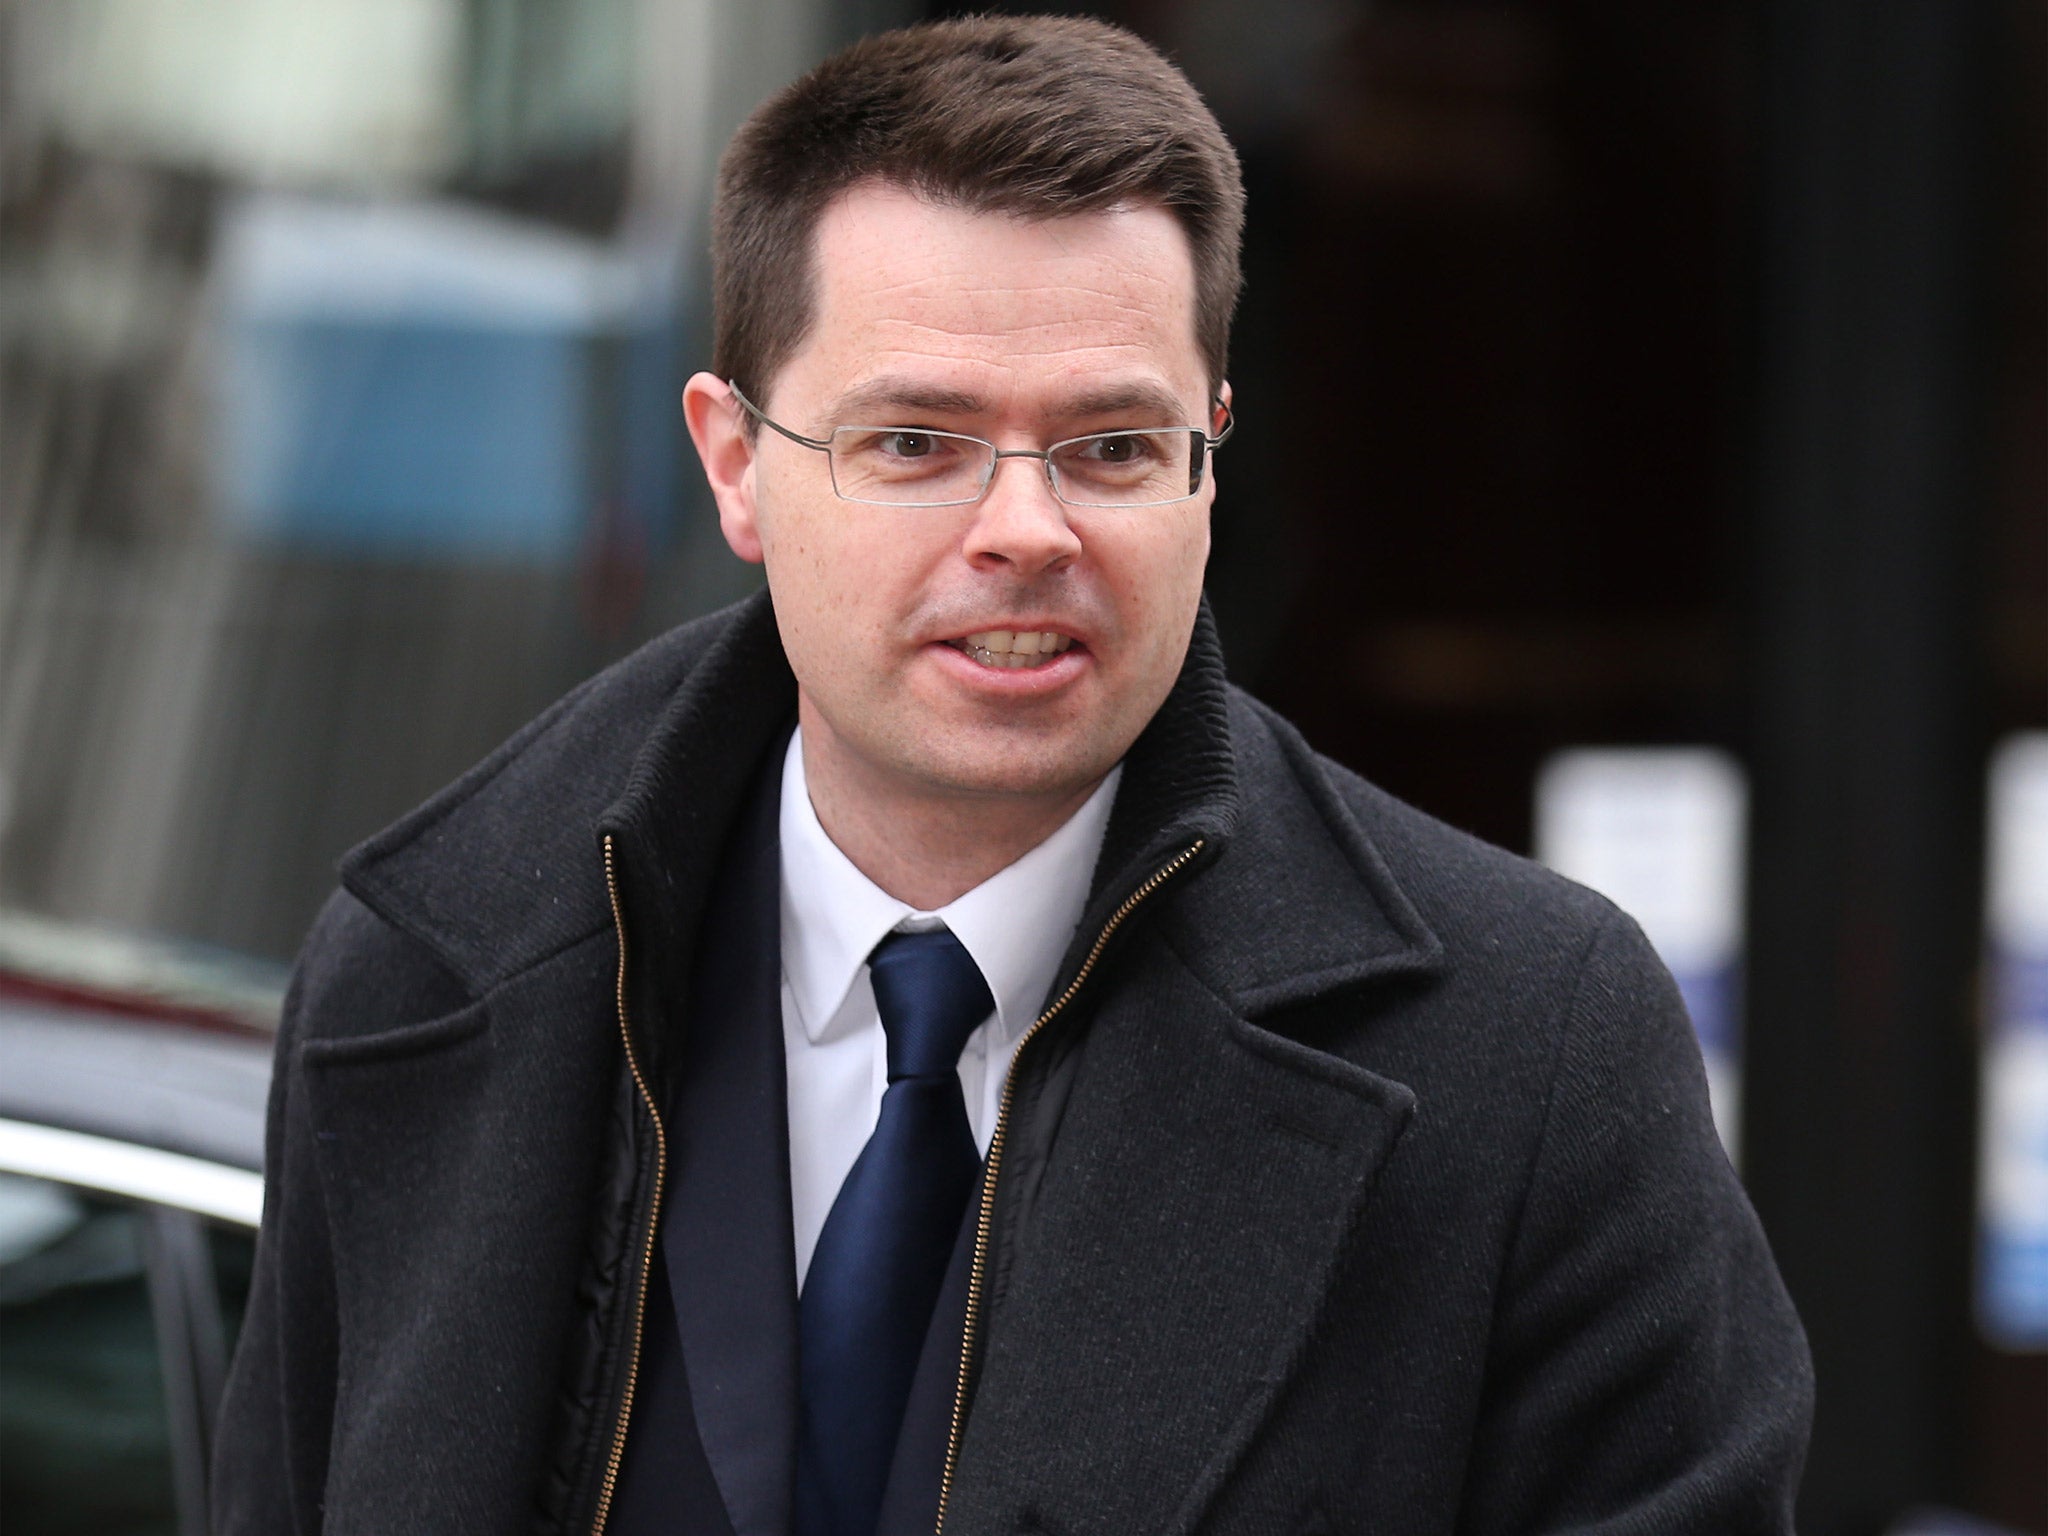 Immigration Minister James Brokenshire: 'It will take longer to clear up the mess we inherited' (Getty)